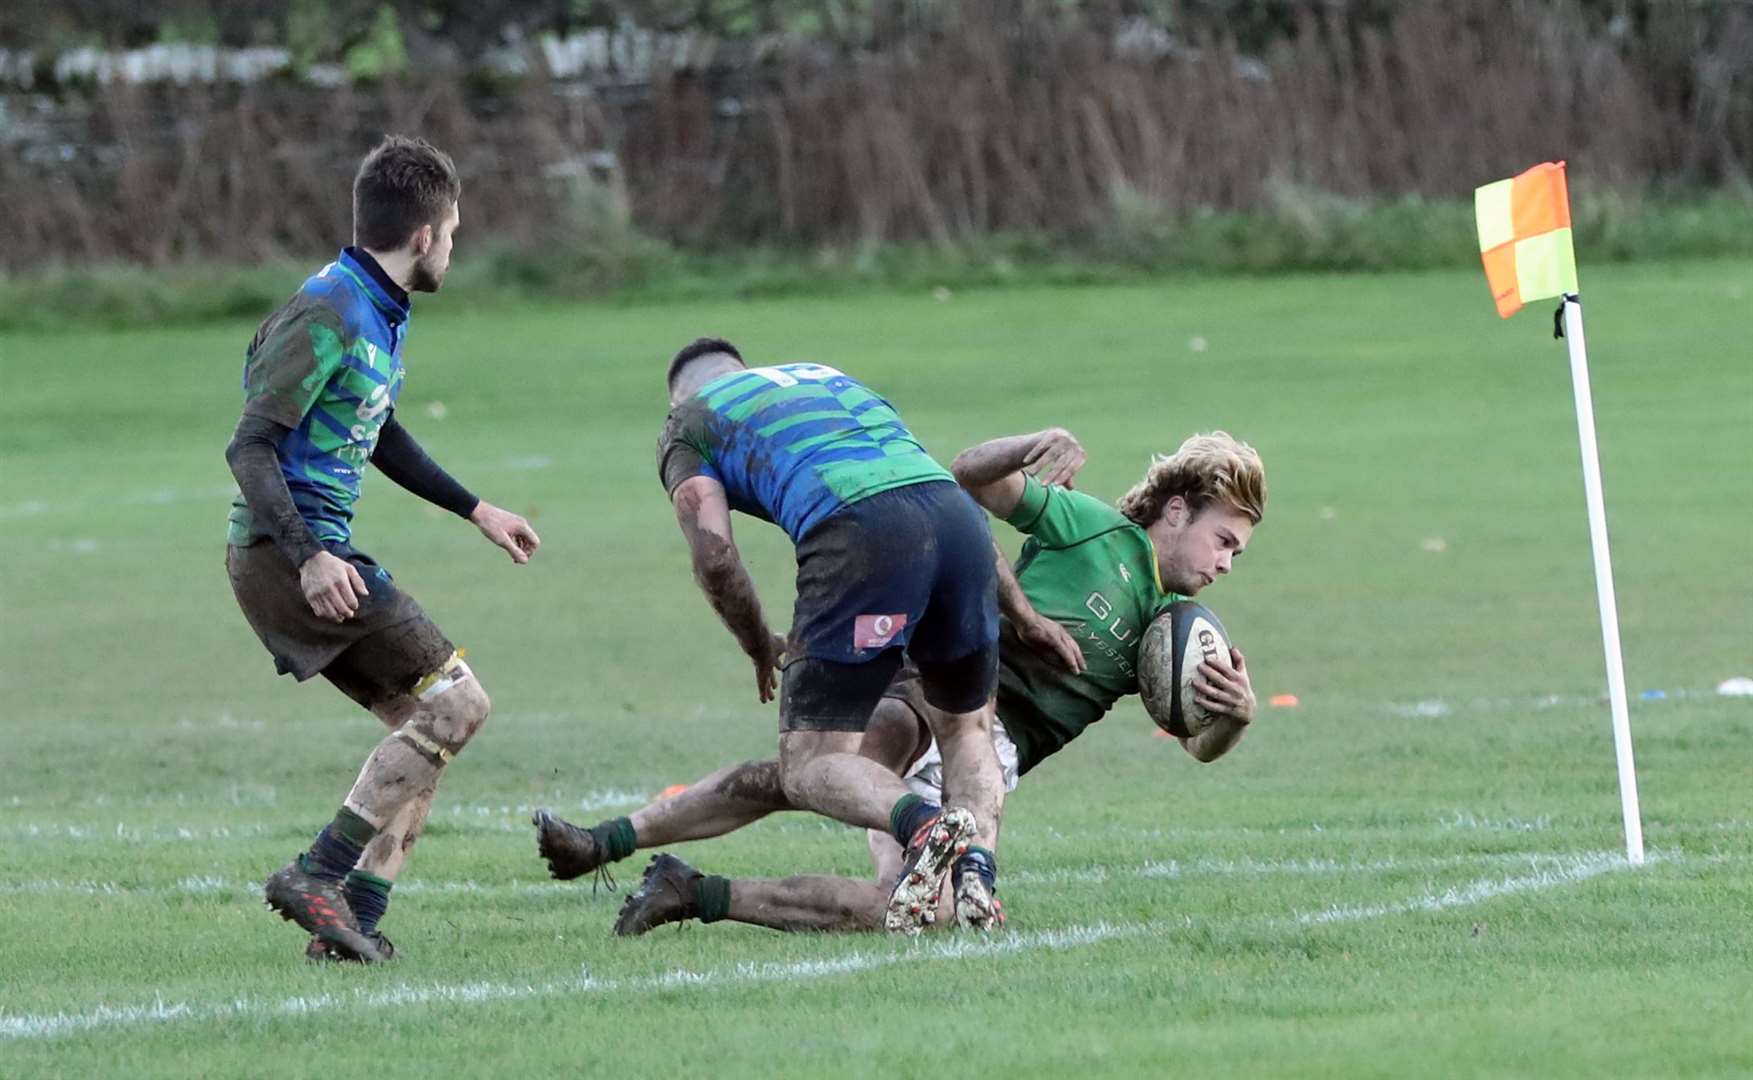 Ruaridh Mackay was one of the try-scorers. Picture: James Gunn